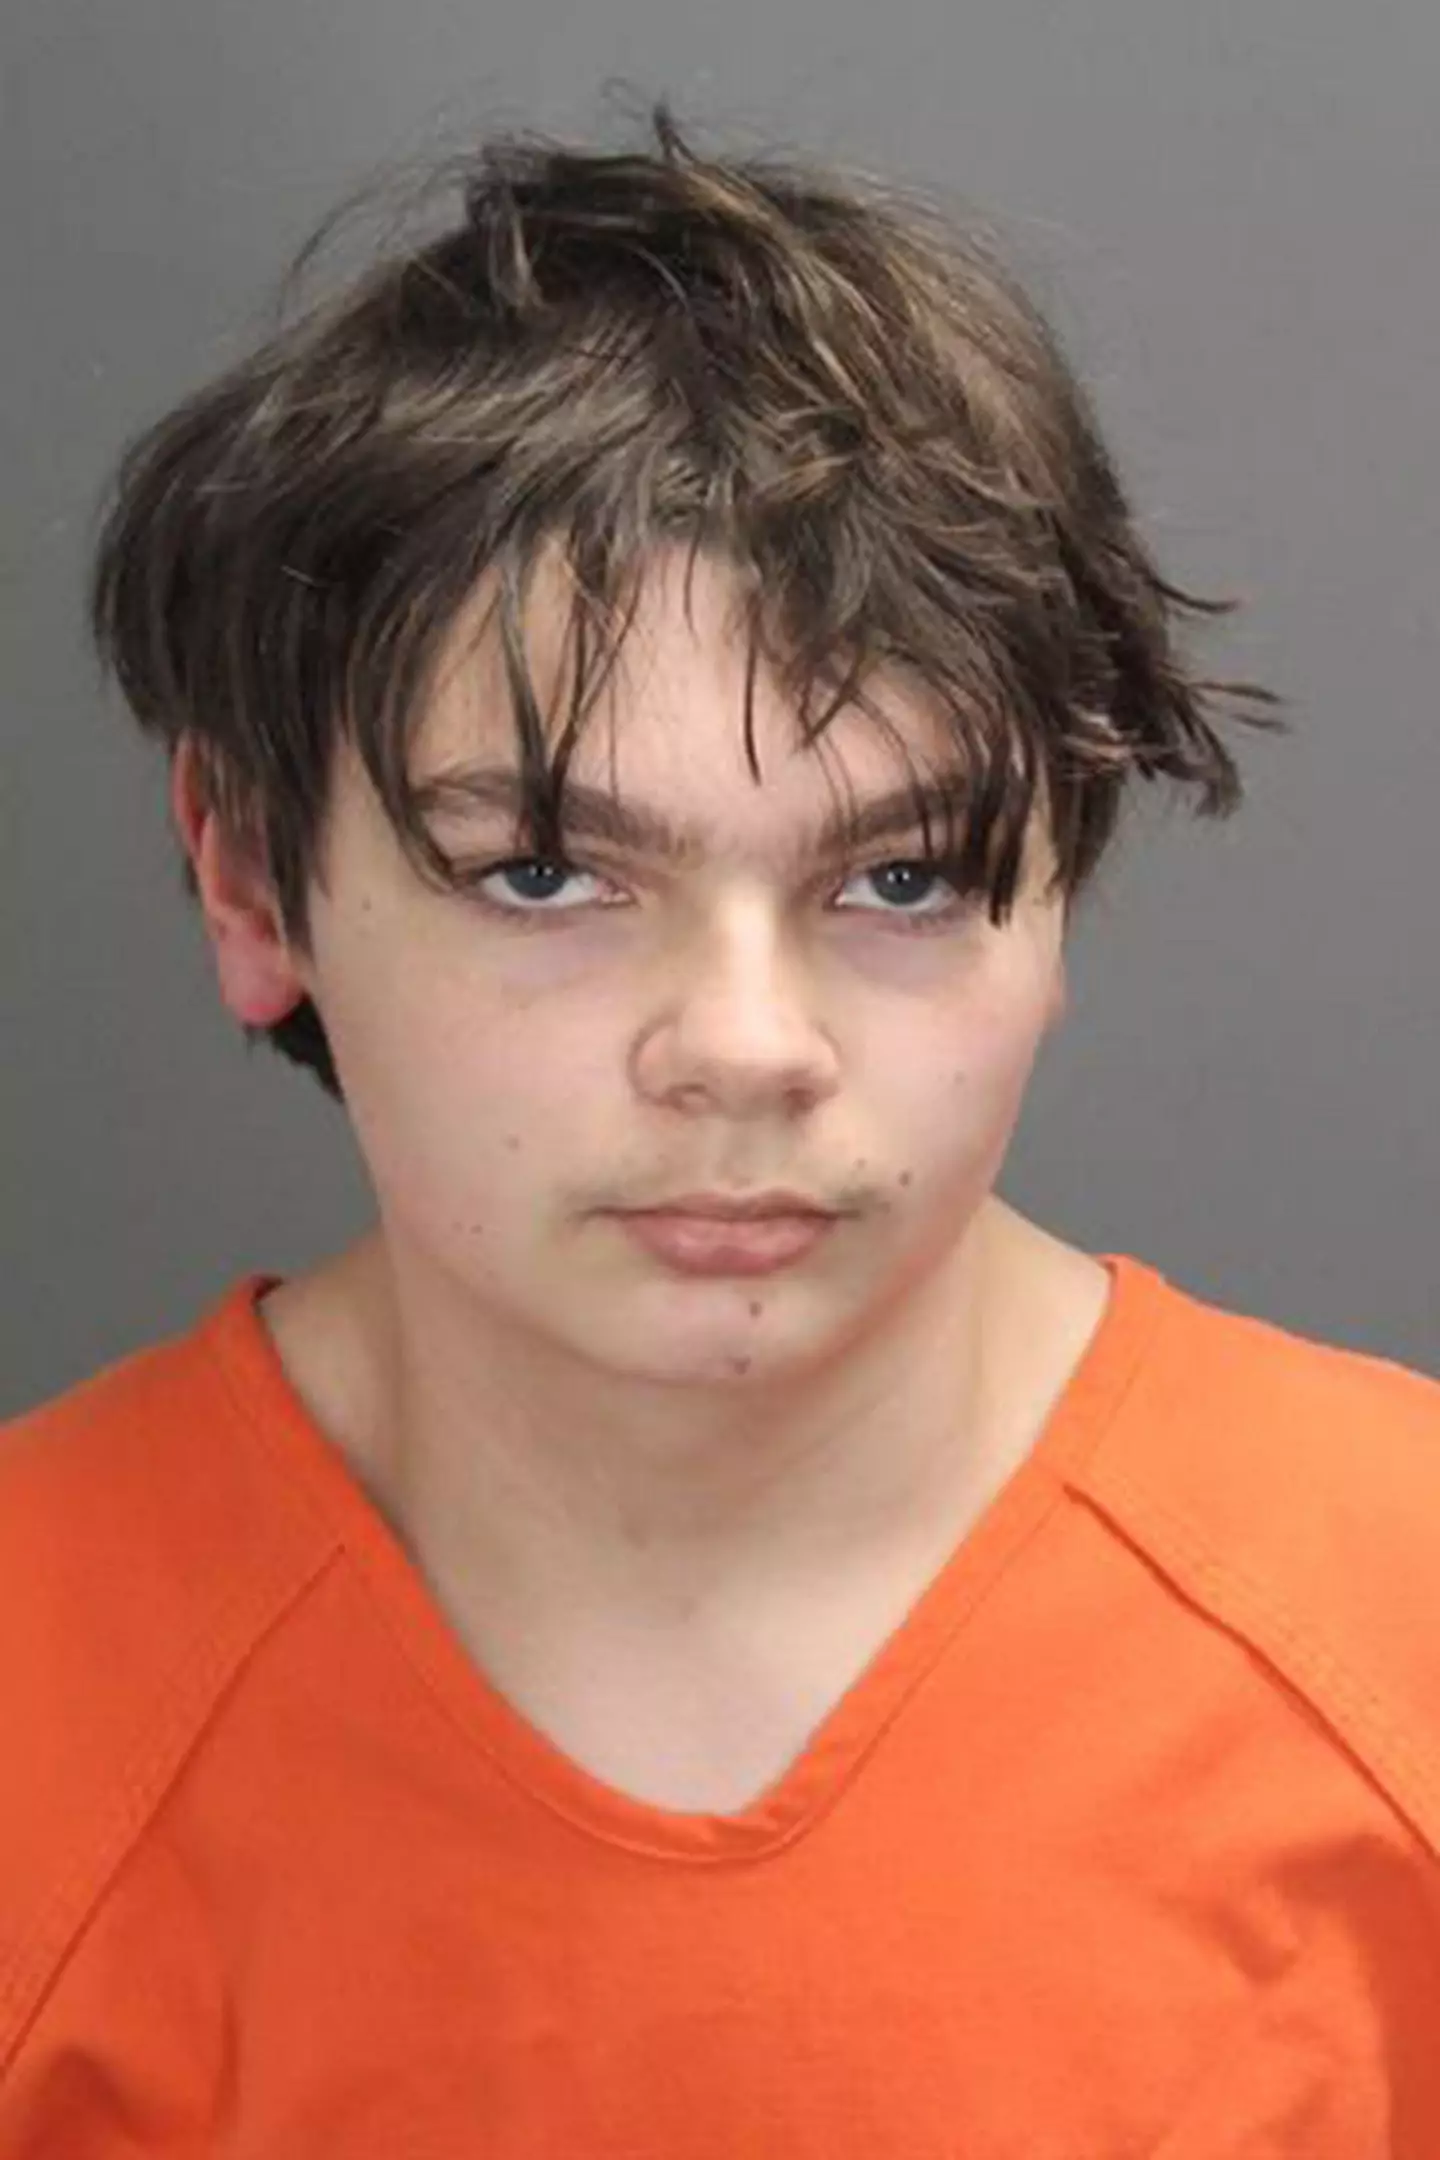 Ethan Crumbley who was 15 at the time has been charged with killing four students at his Michigan high school on 30 November 2021.